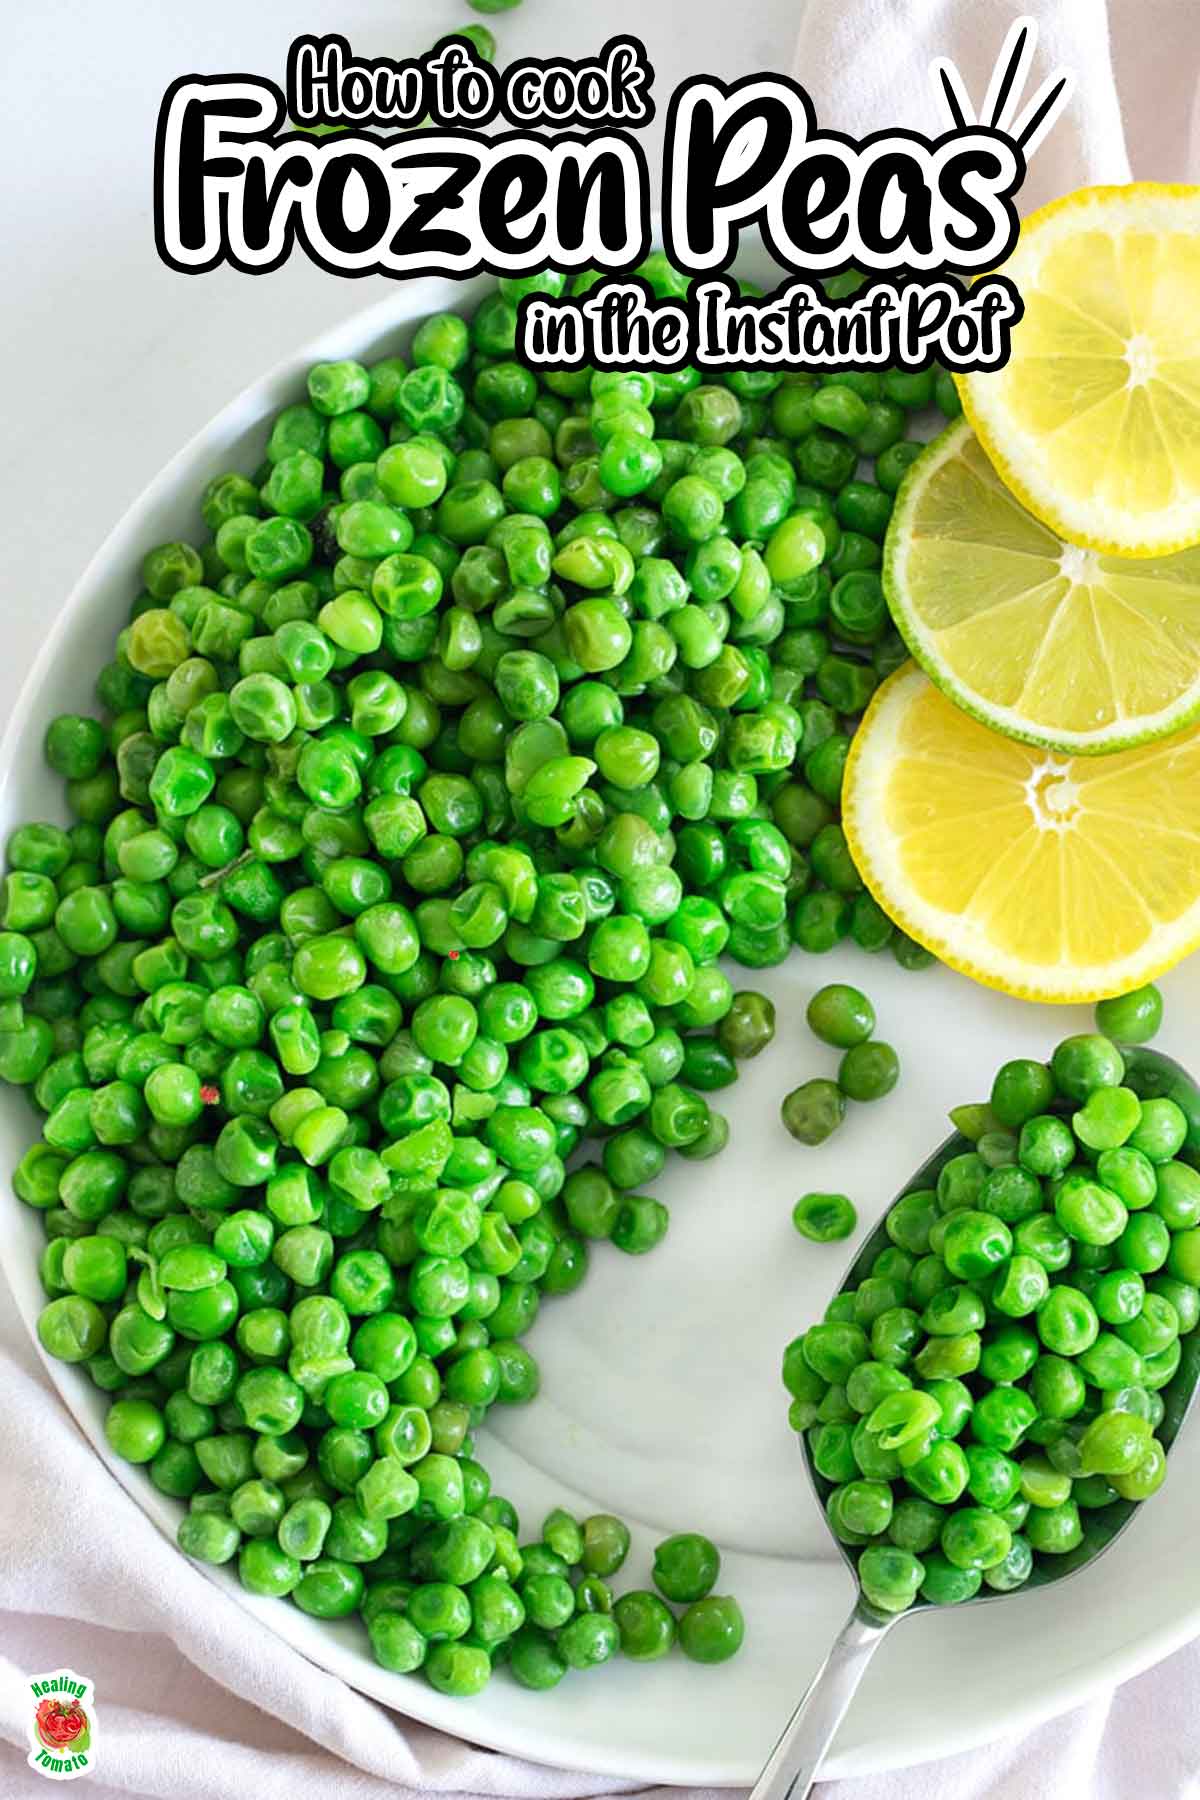 Closeup view of a white plate filled with cooked green peas and a serving spoon with lemon rounds on top of the plate.